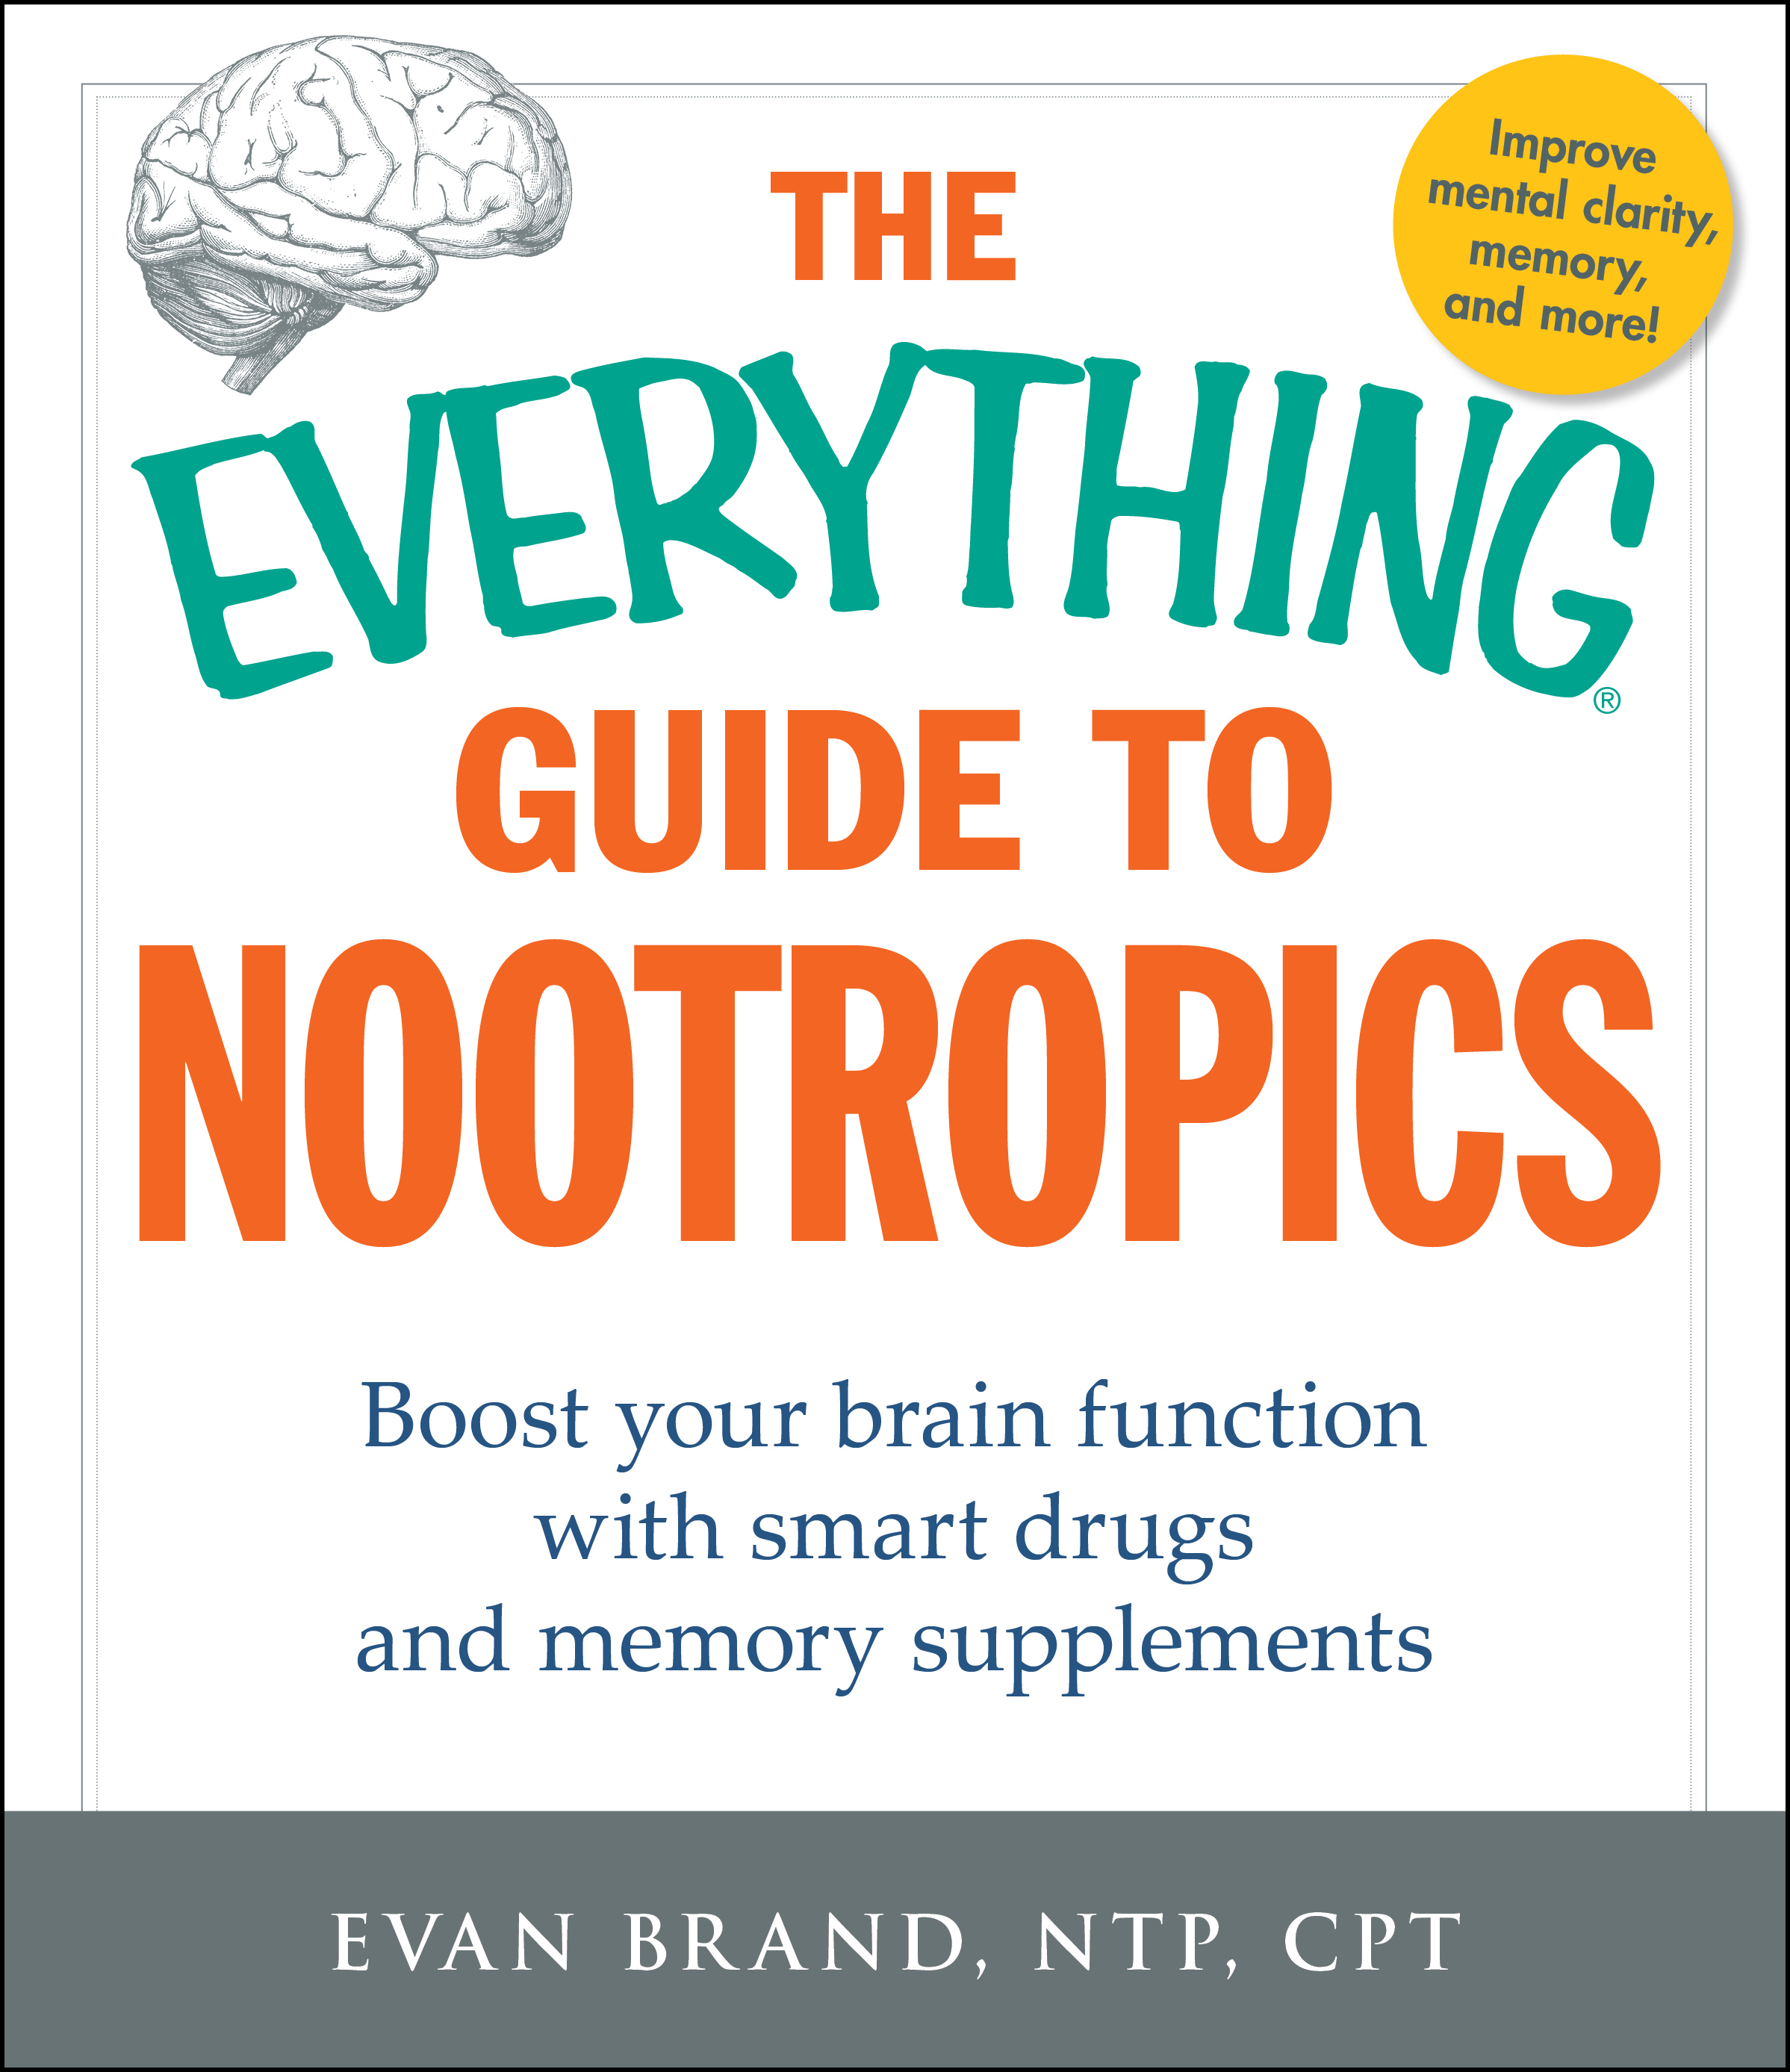 The Everything Guide To Nootropics